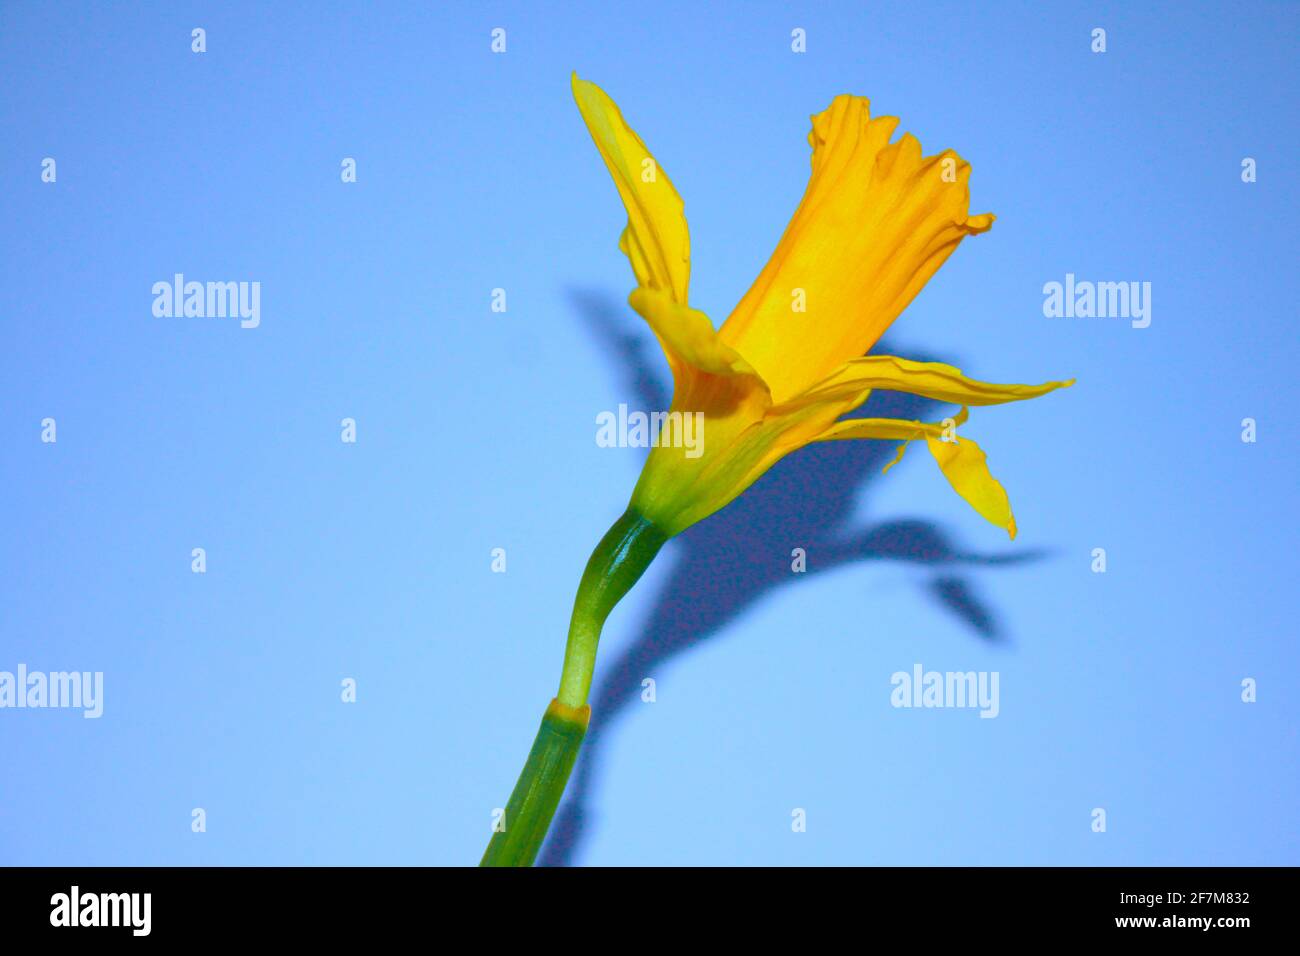 Bright yellow daffodil portraiture. Close up of yellow daffodil against cool blue background. Images of spring and nature captured indoors. Spring UK. Stock Photo